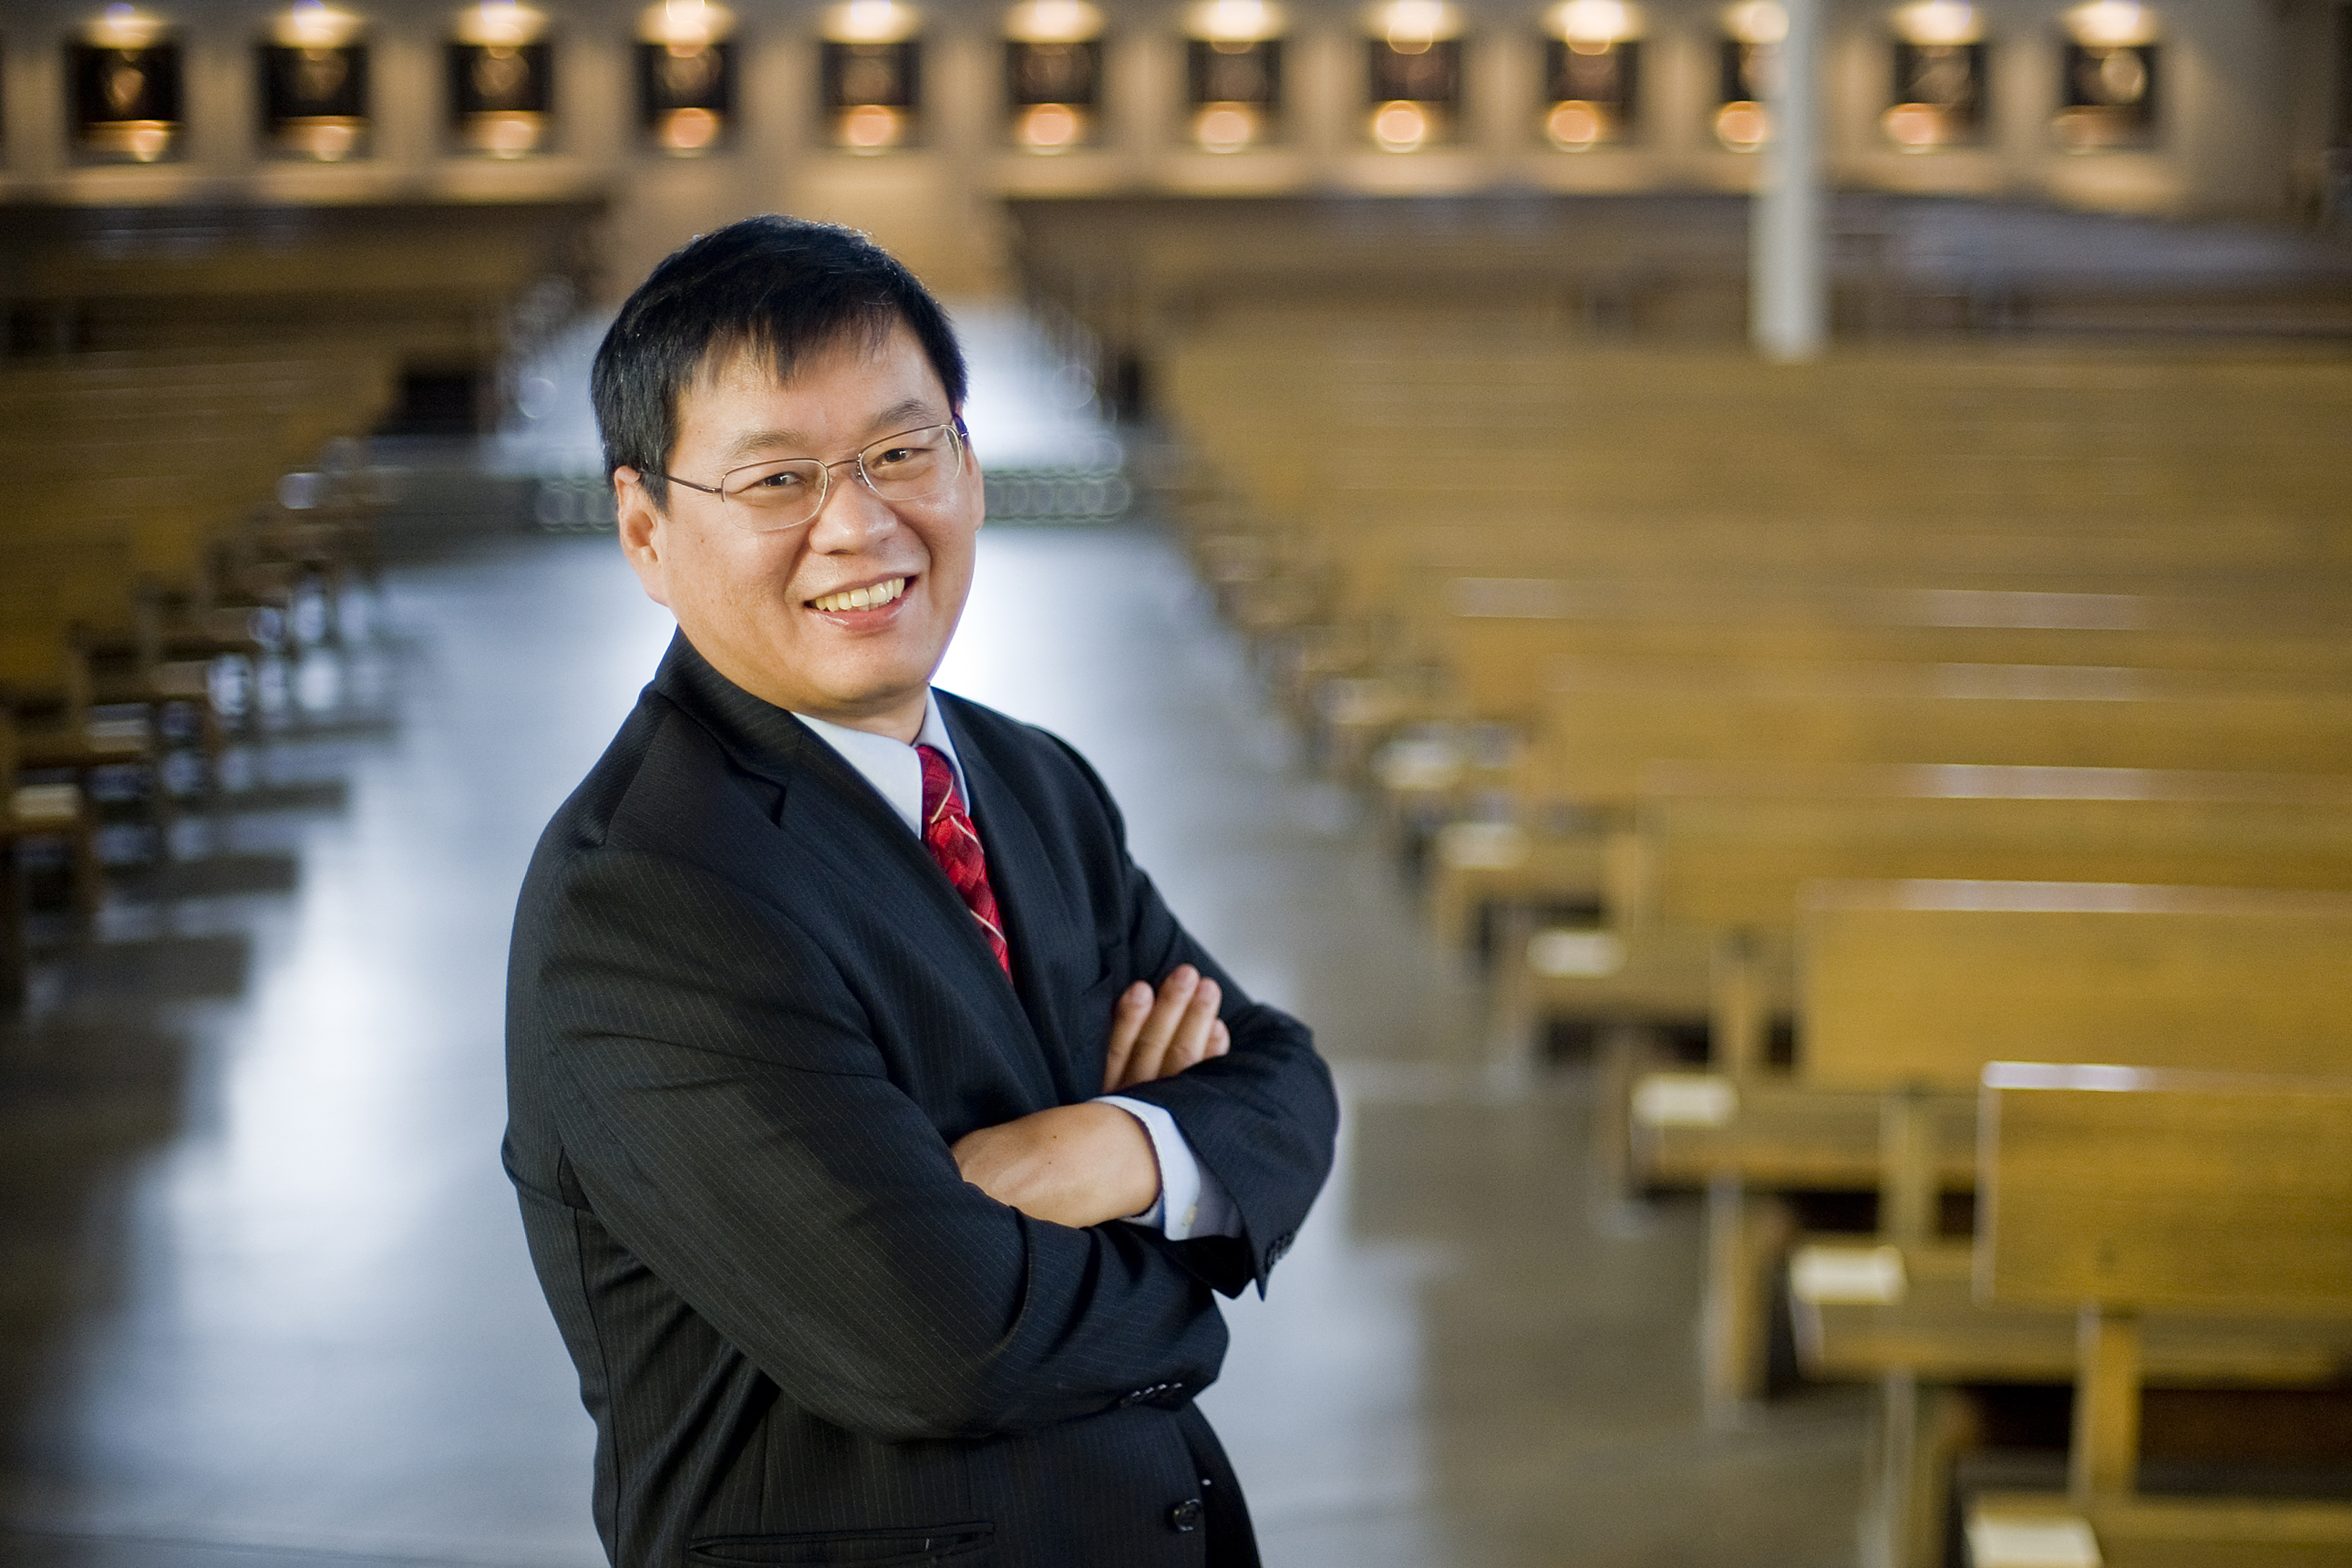 Prof: Religious trends in China fueled by government restrictions